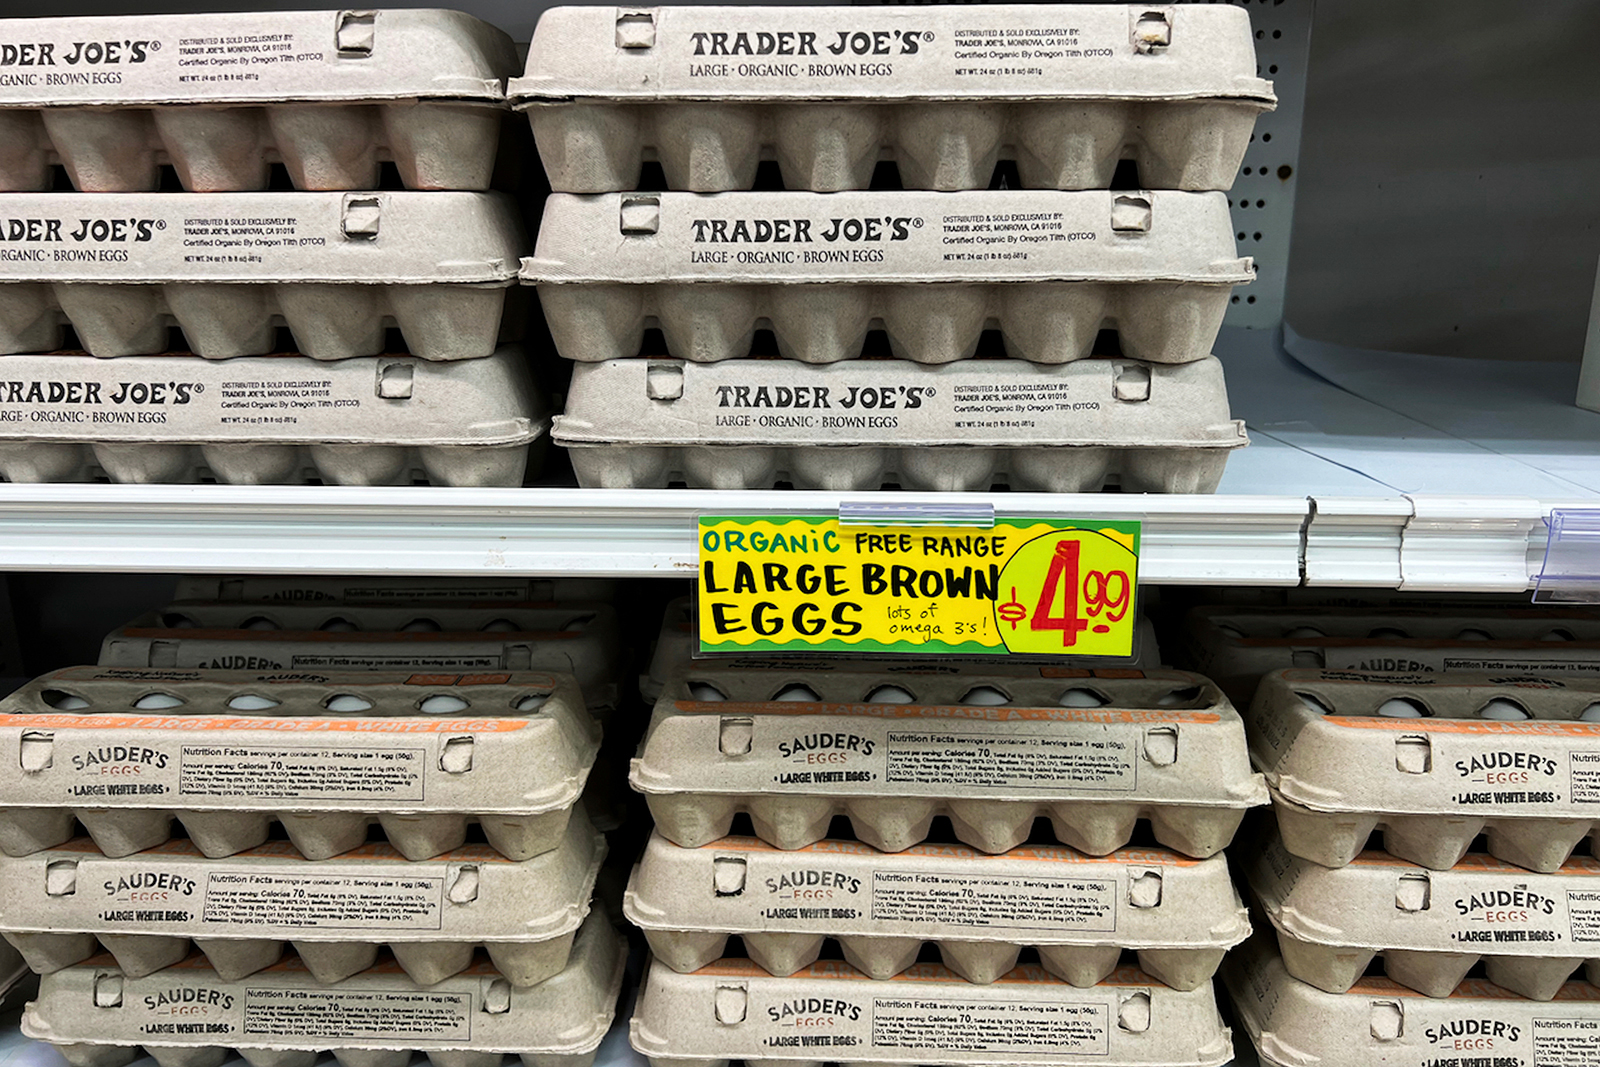 Eggs are displayed on shelves at a store in Portland, Maine, on January 27, 2023.